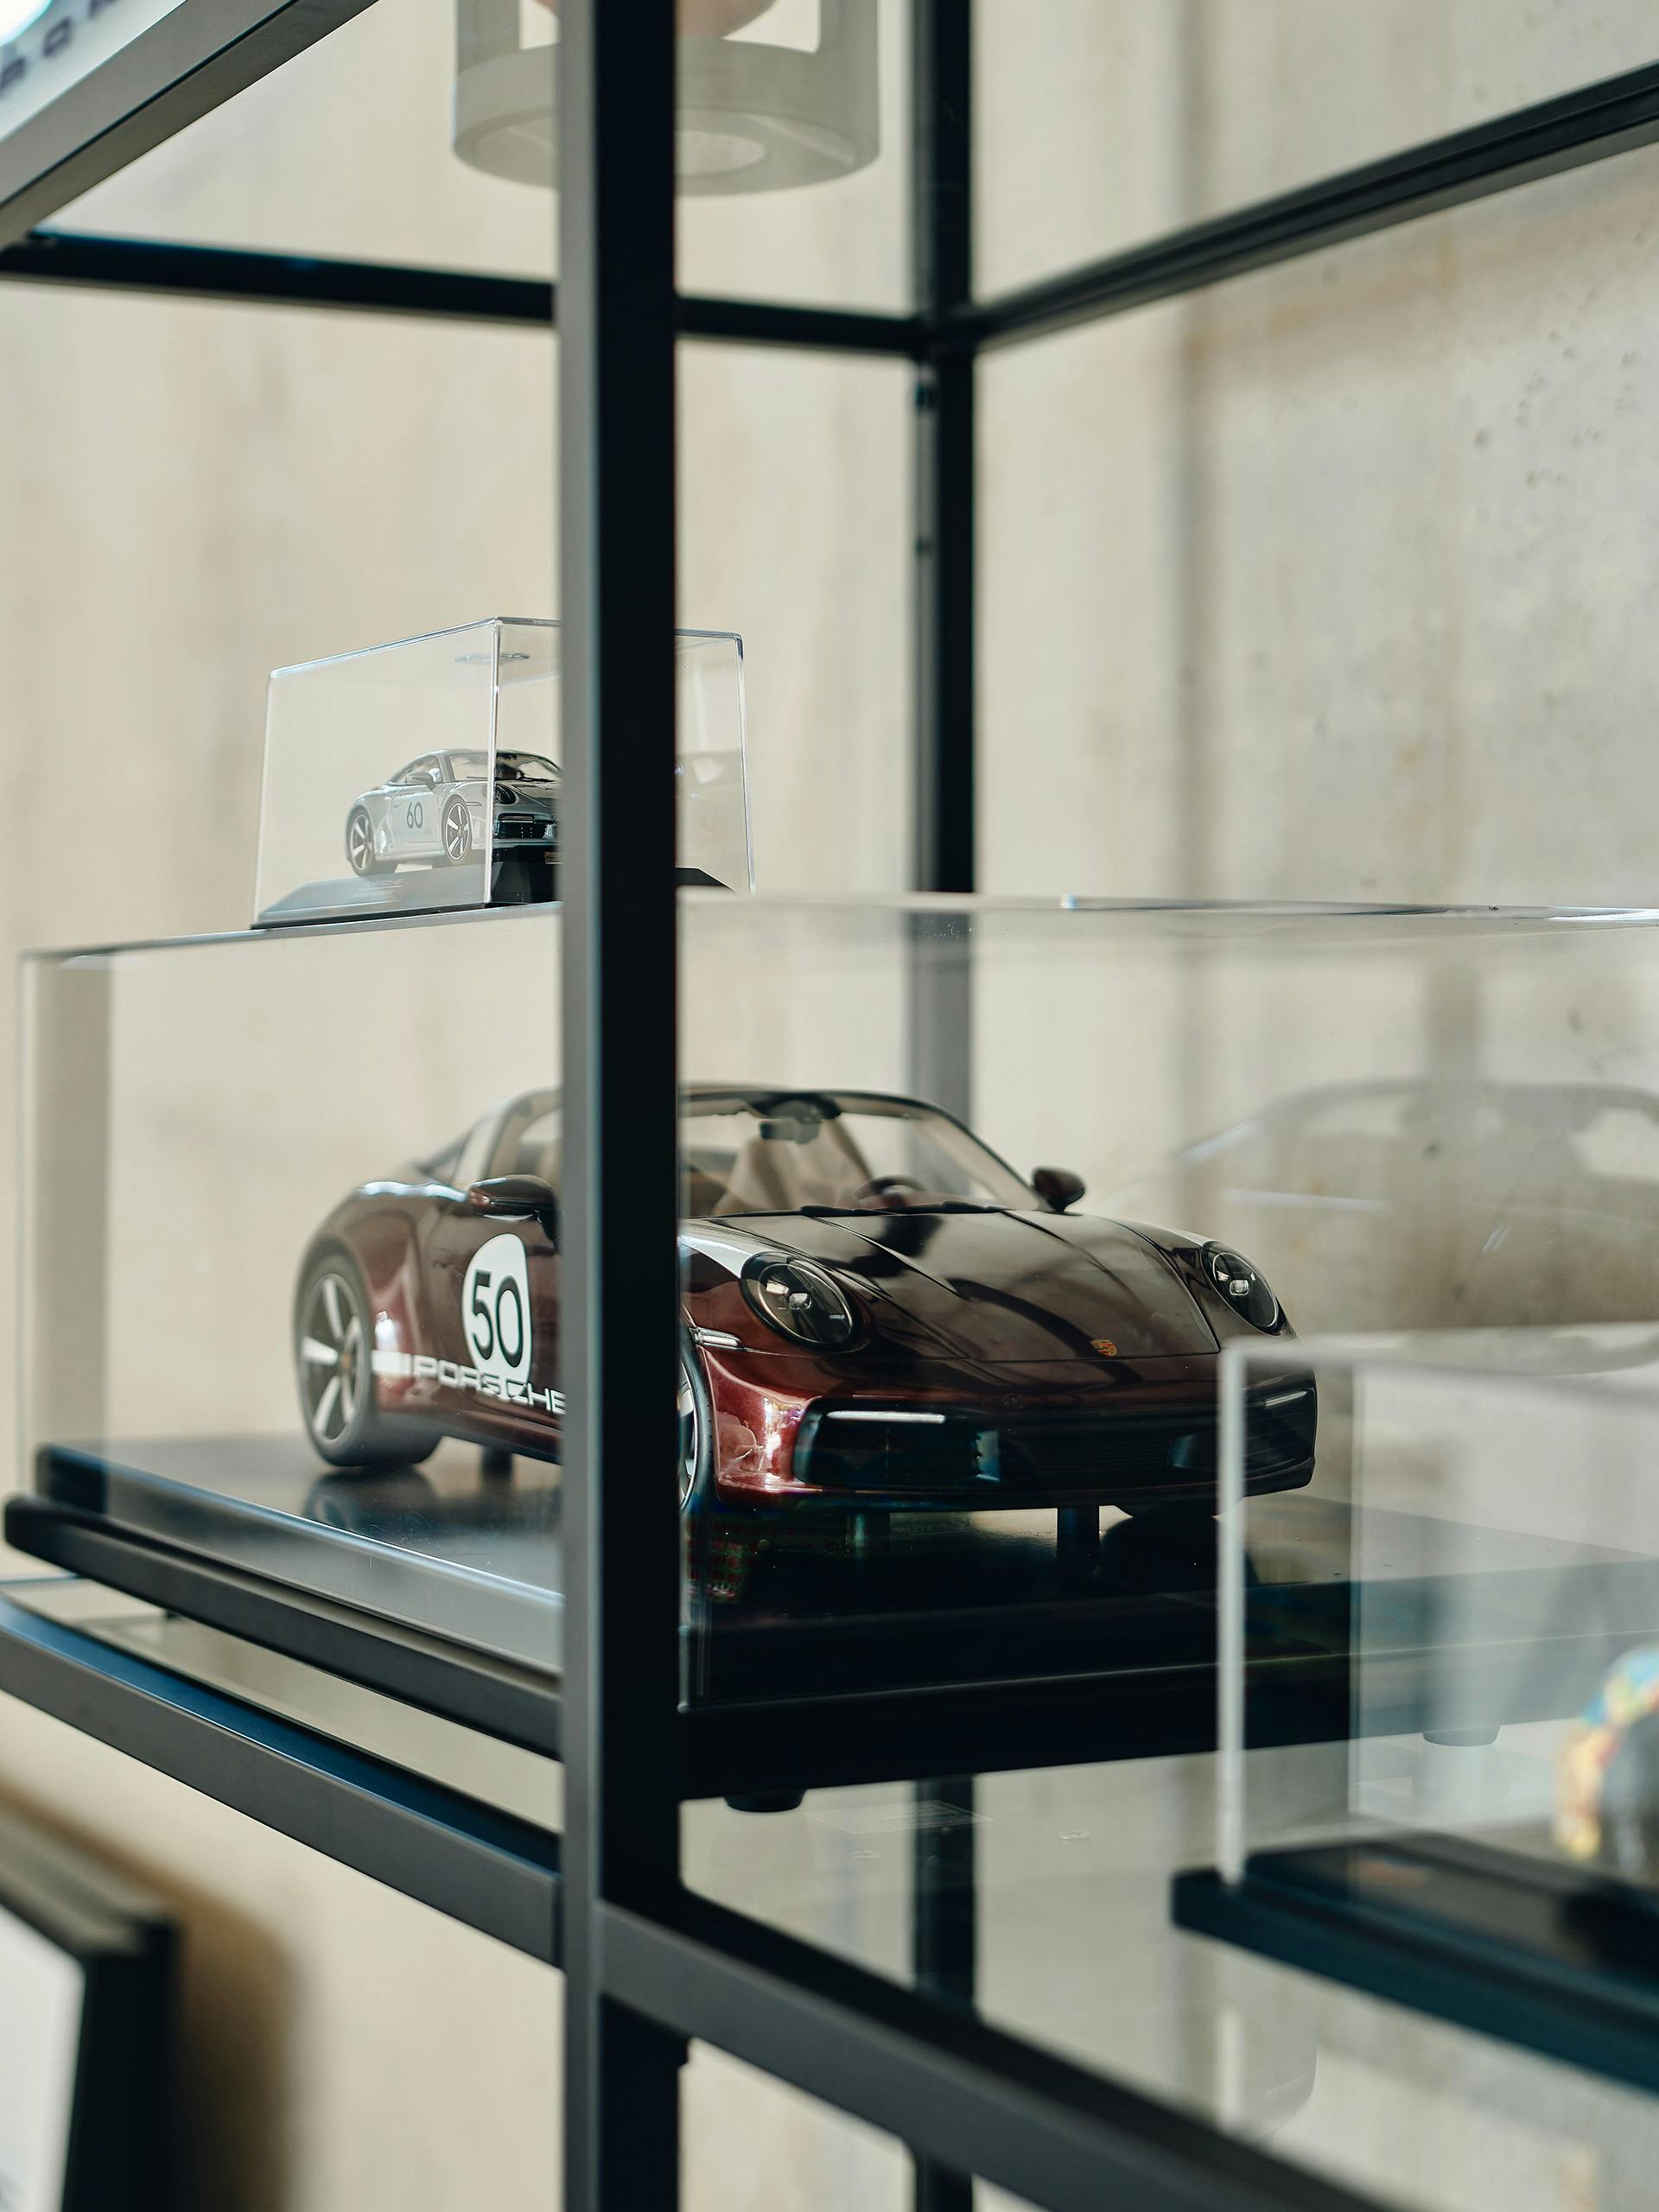 Shown are model cars from Porsche in a glass cabinet